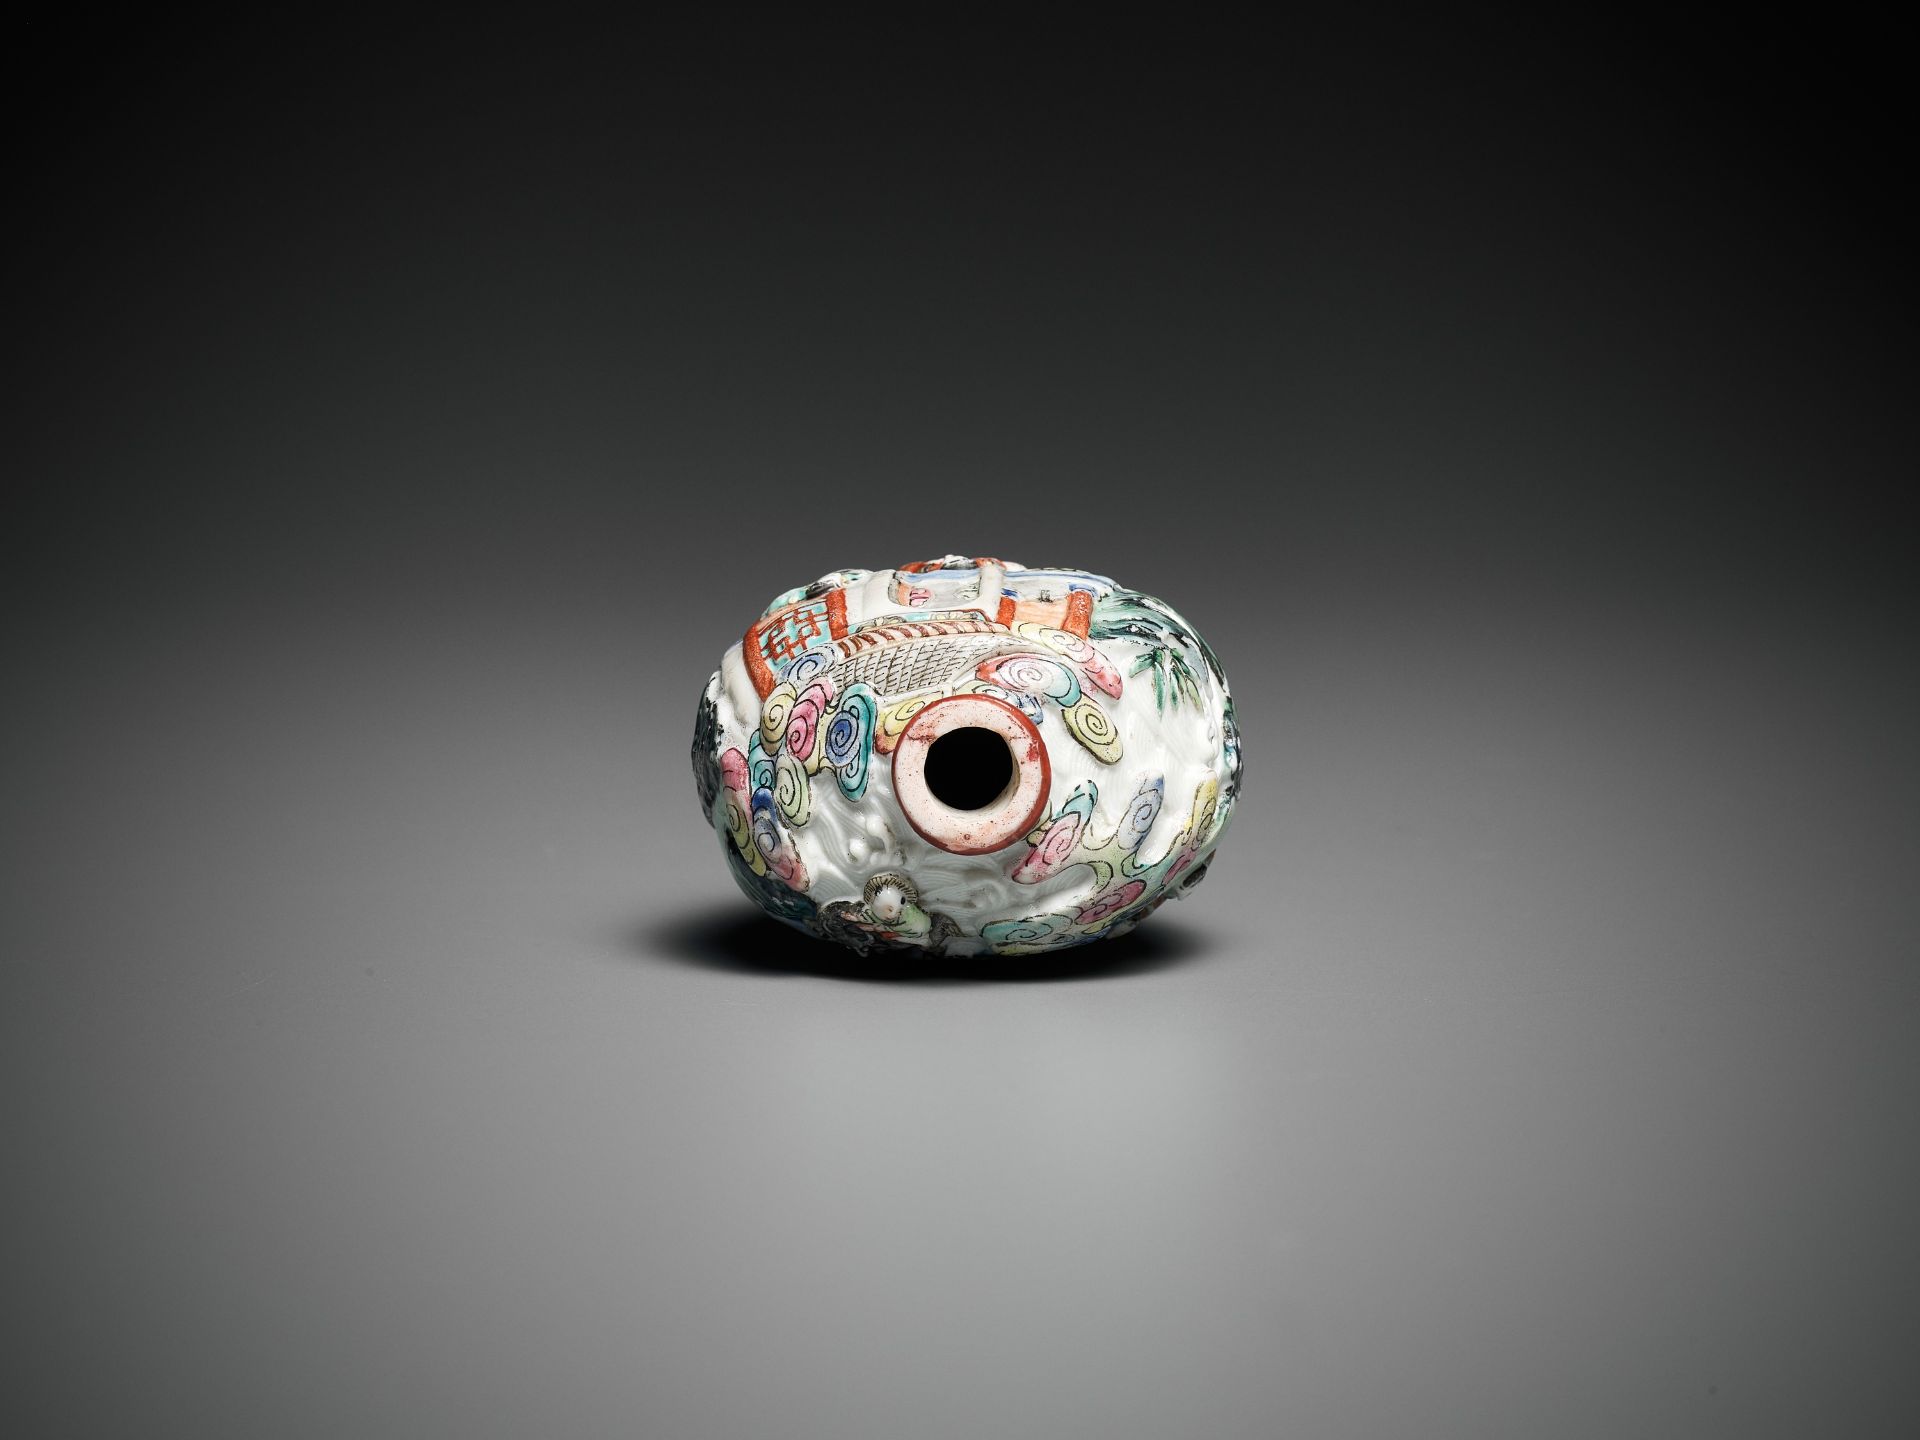 AN IMPERIAL MOLDED AND ENAMELED PORCELAIN SNUFF BOTTLE, JIAQING MARK AND PERIOD - Image 7 of 8